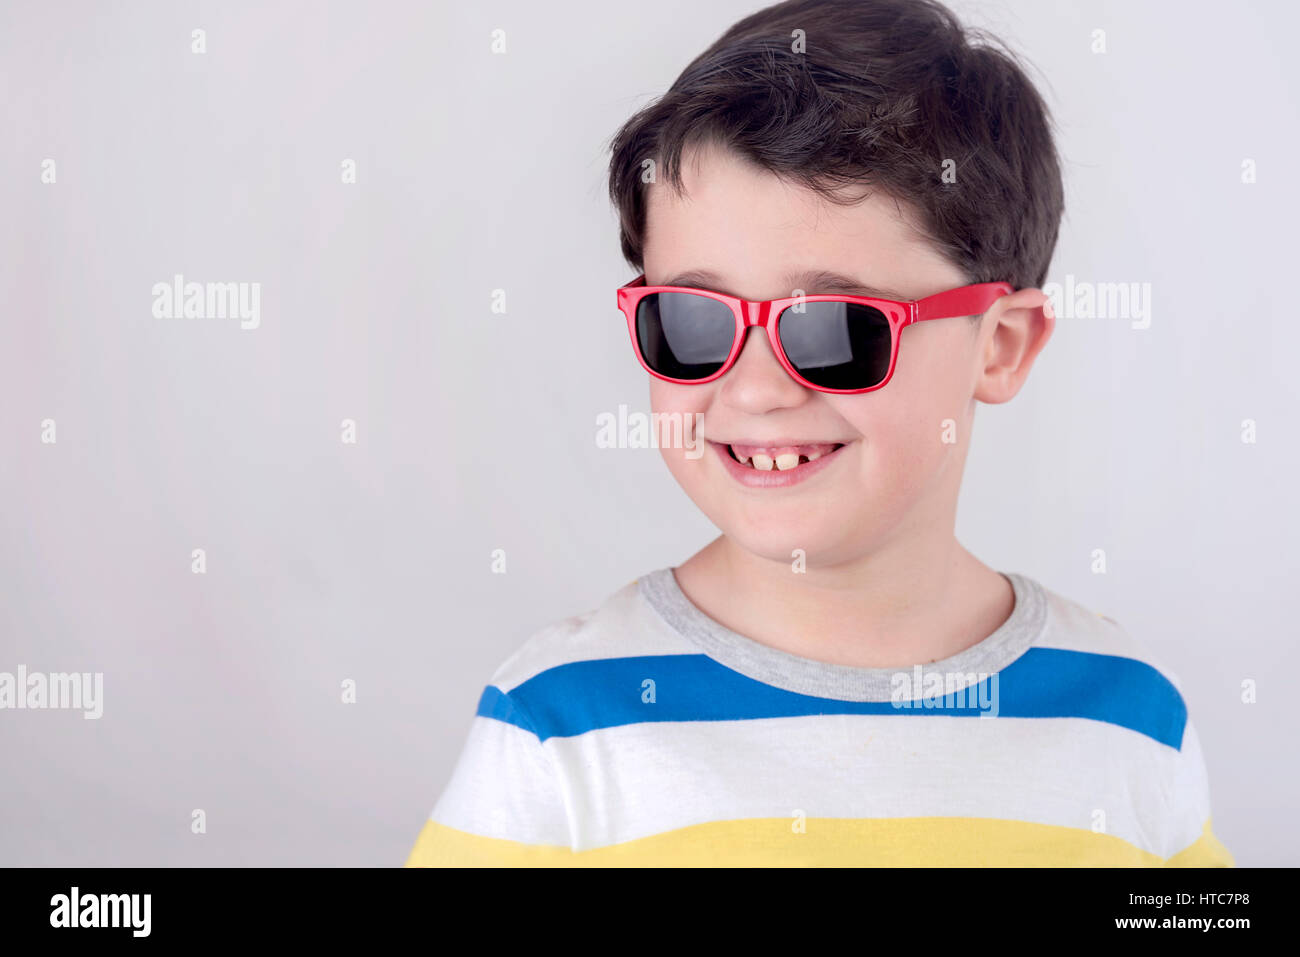 Smiling boy with sunglasses Stock Photo